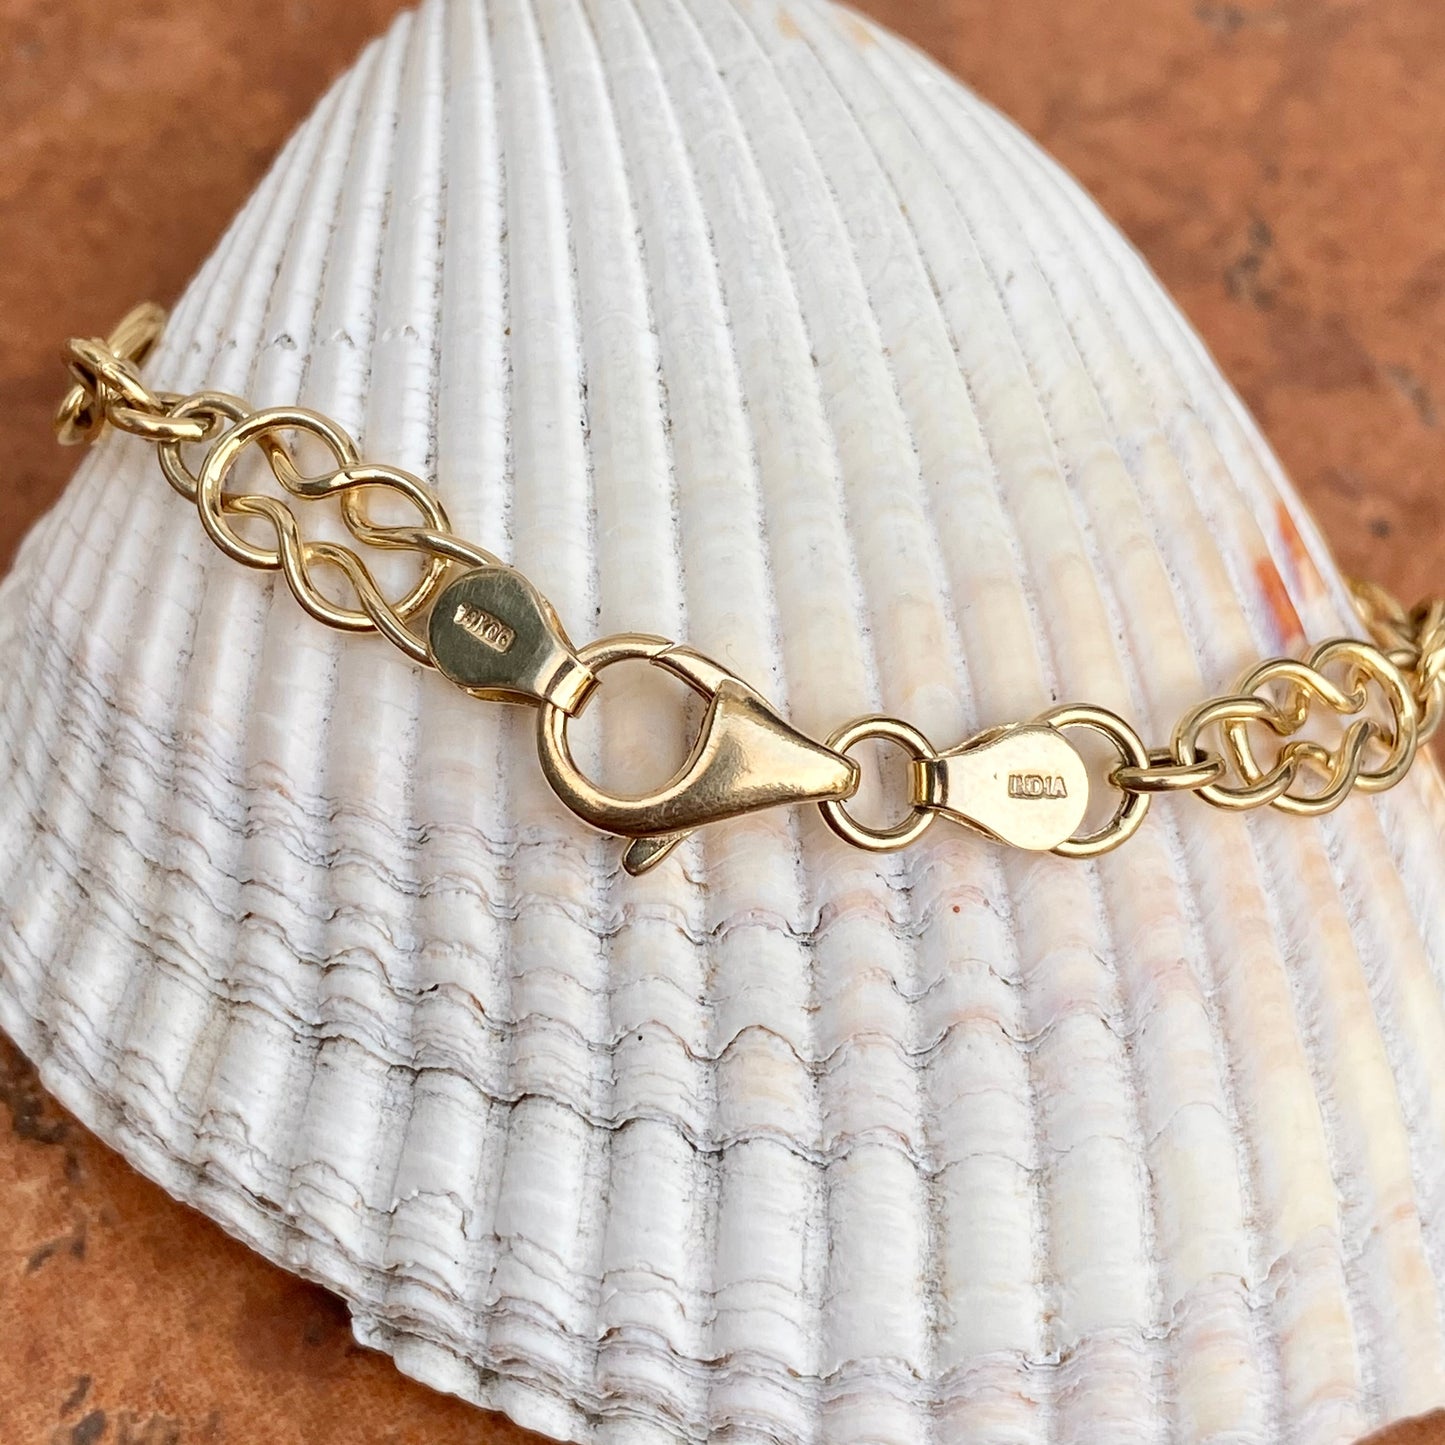 14KT Yellow Gold Polished Circles Flat Link Chain Bracelet